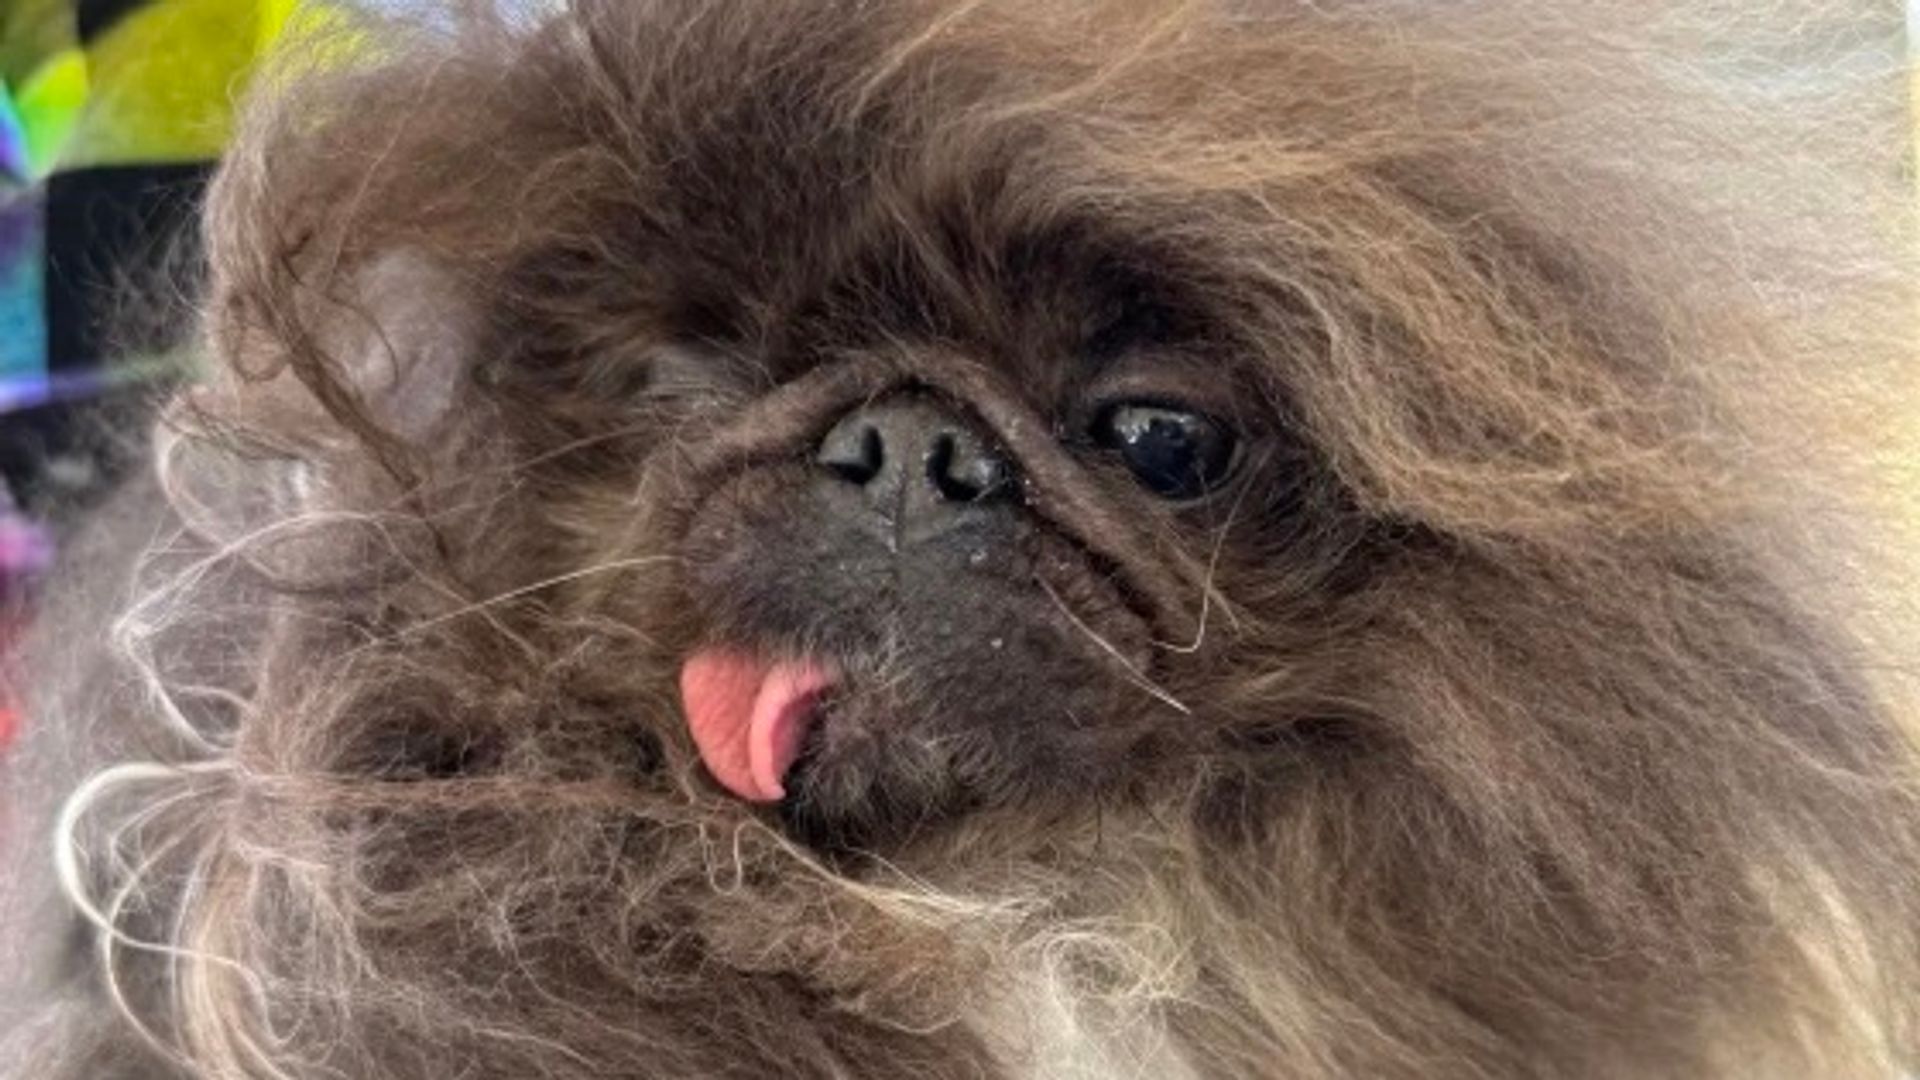 'Ugliest' dog in the world revealed